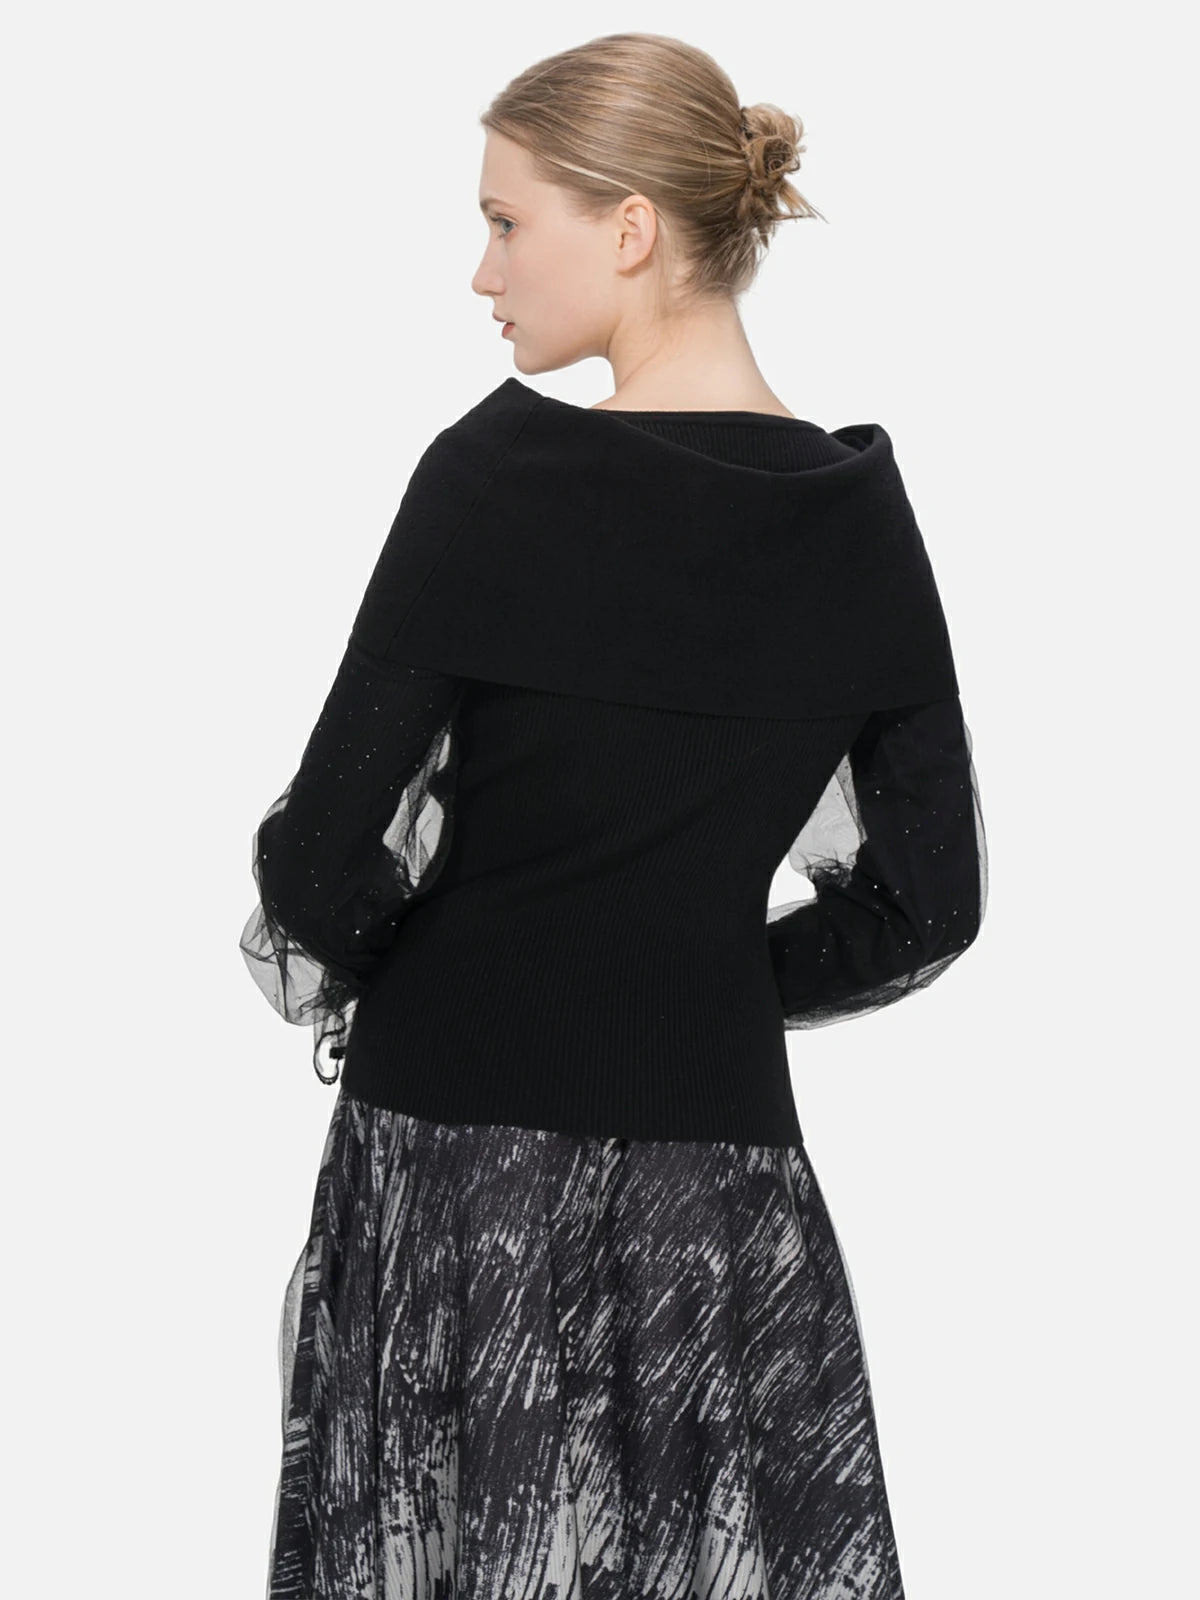 Fashionable details, including a one-shoulder bow shawl and splice tulle sleeves, elevate the charm of this chic and refined fitted sweater.